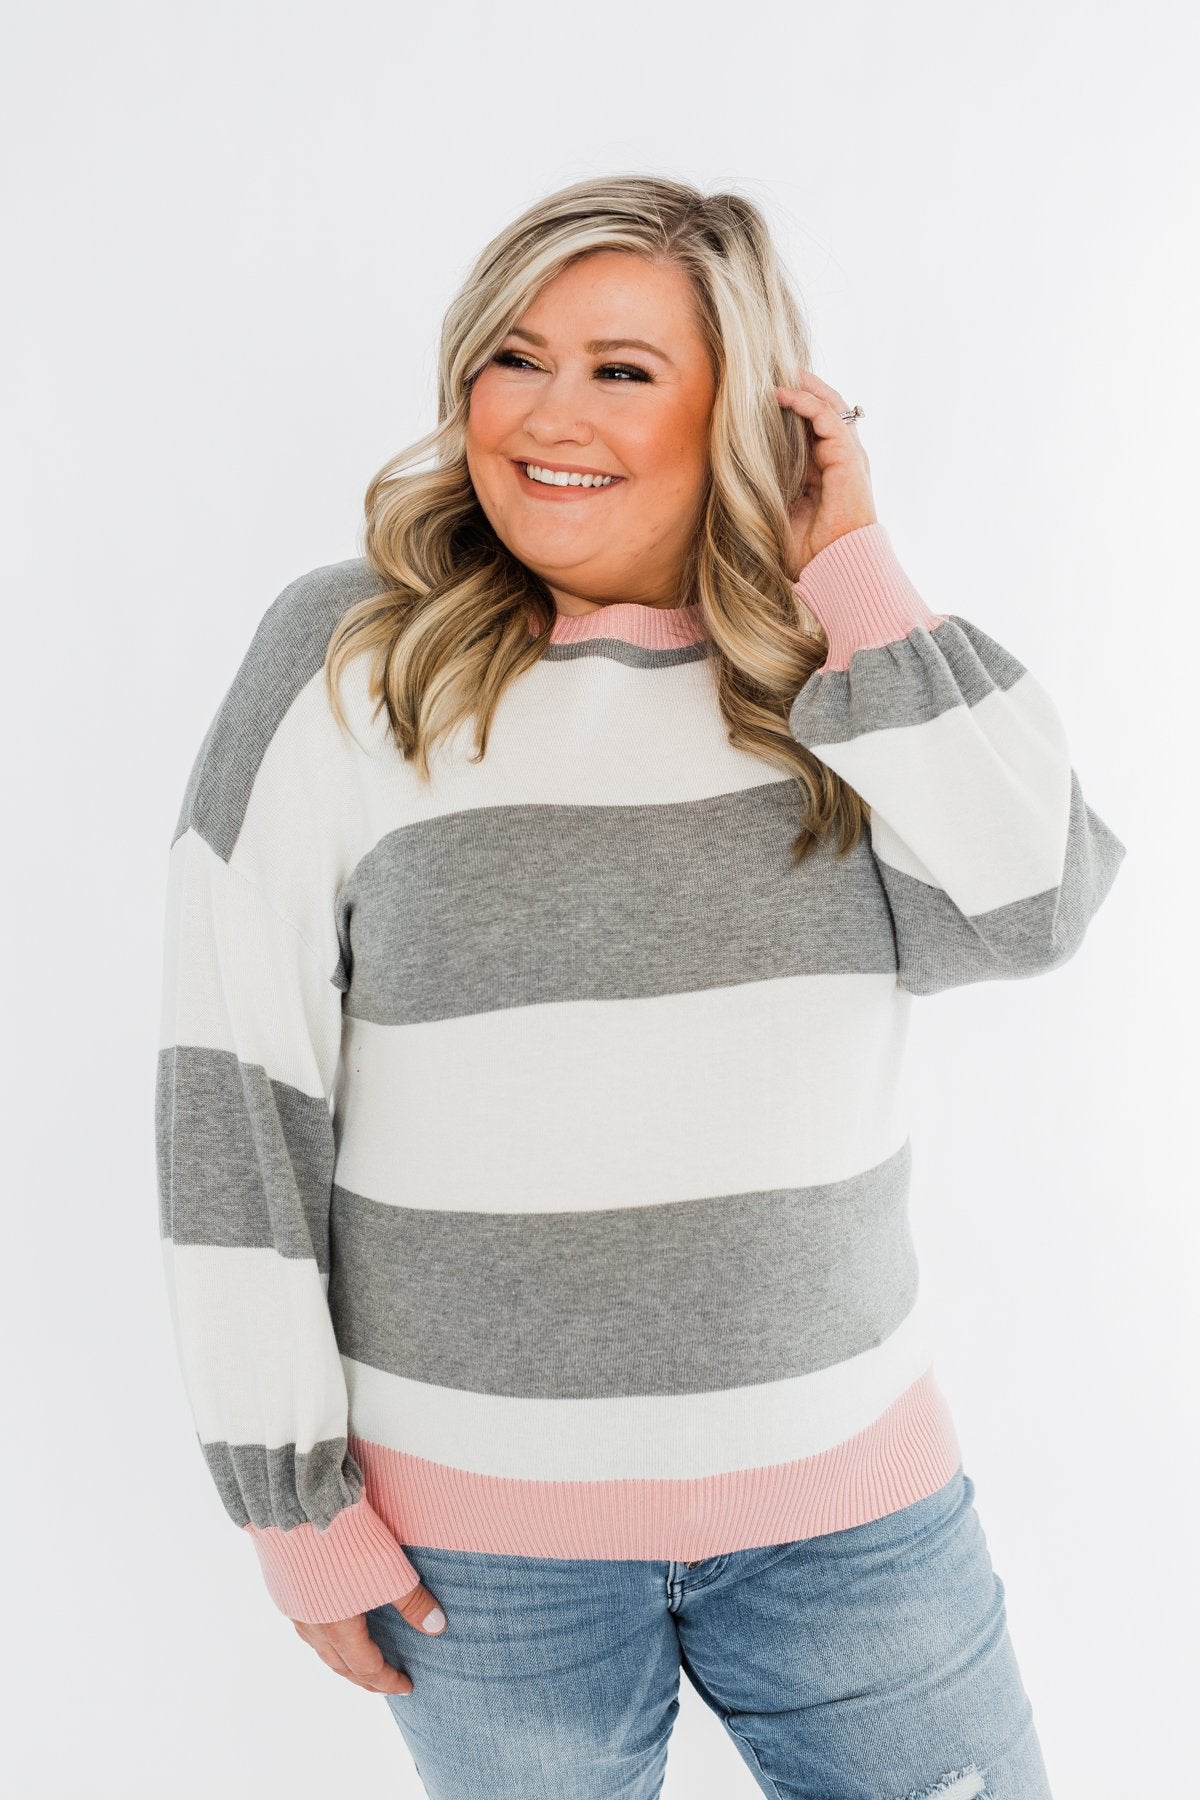 All My Life Striped Sweater- Grey & Pink